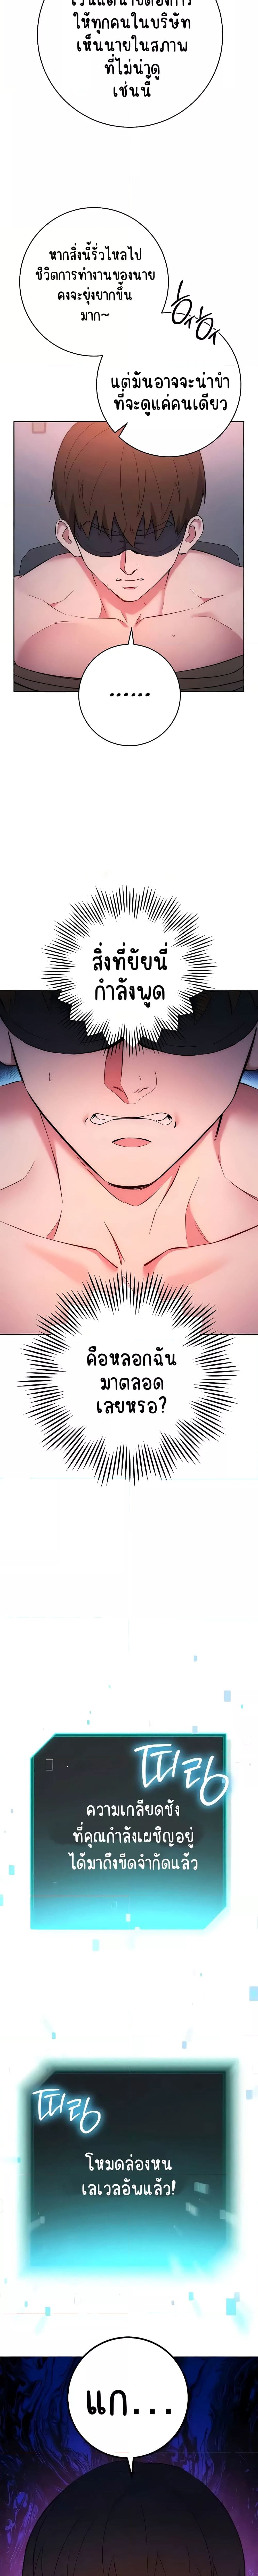 Outsider: The Invisible Man ตอนที่ 8 ภาพ 20